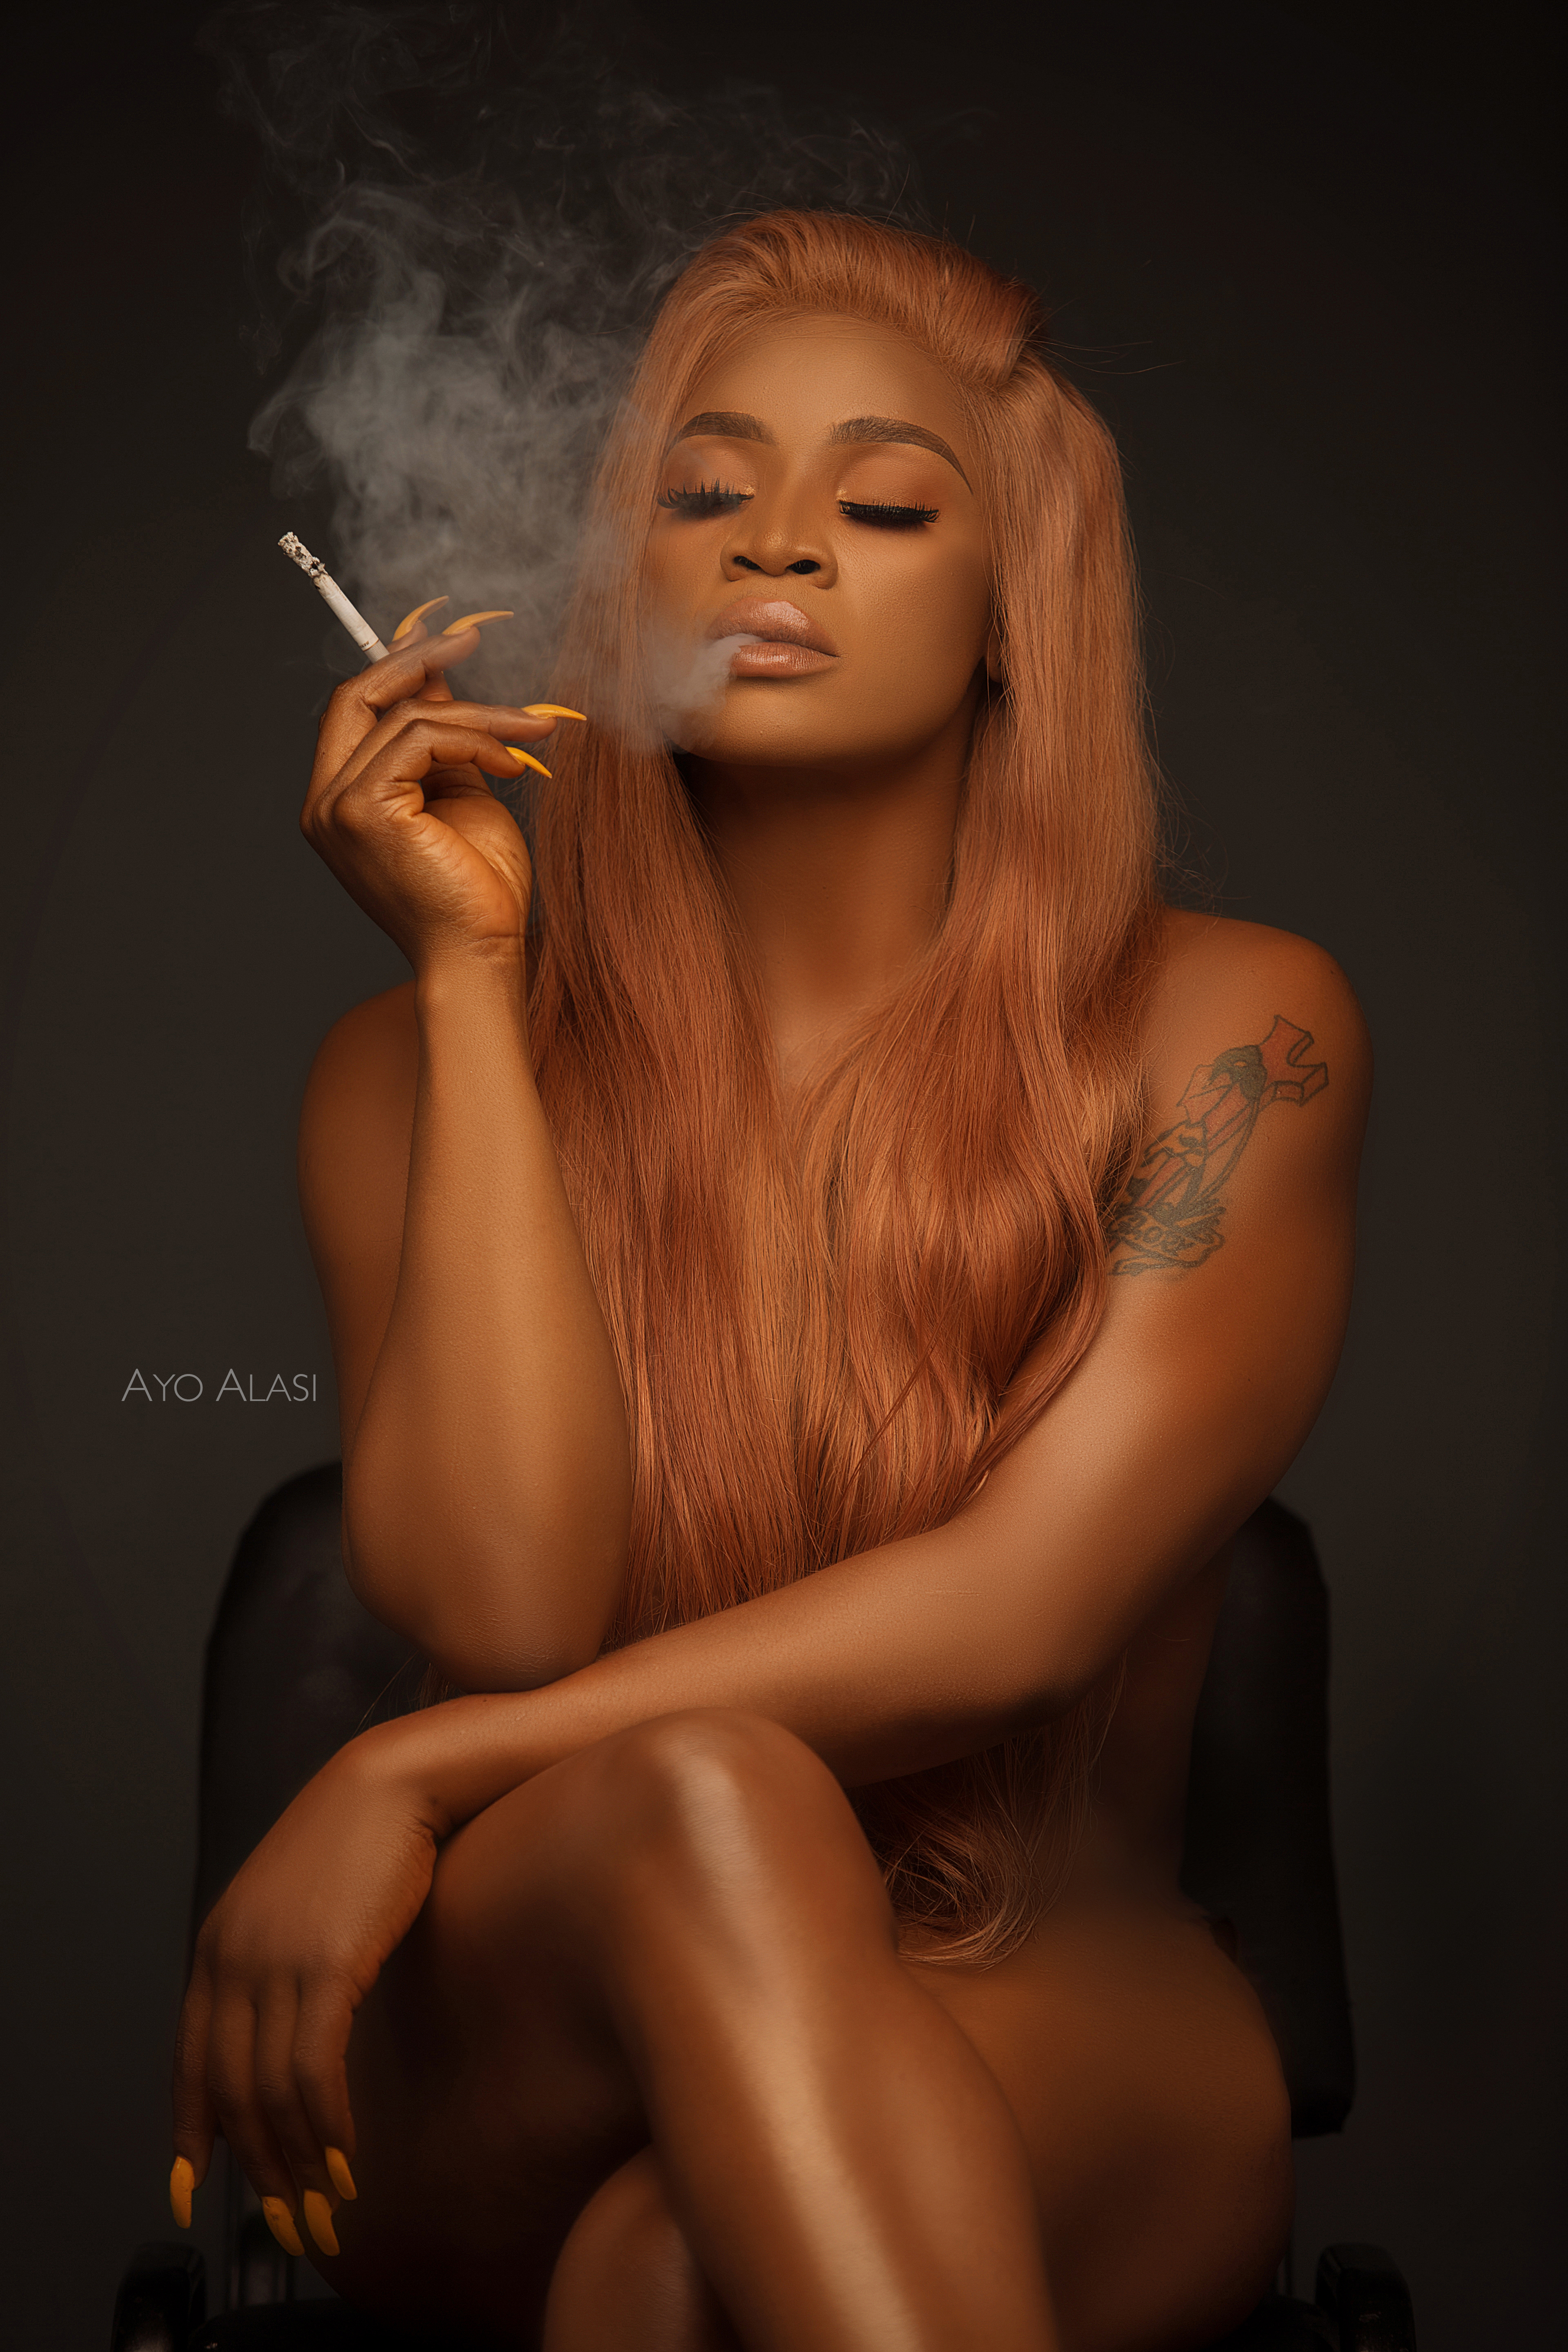 It's Friday guys and Uche Ogbodo is setting the tone for the weekend with some really dripping hot and nude photos to mark her birthday [TribesmenAgency]